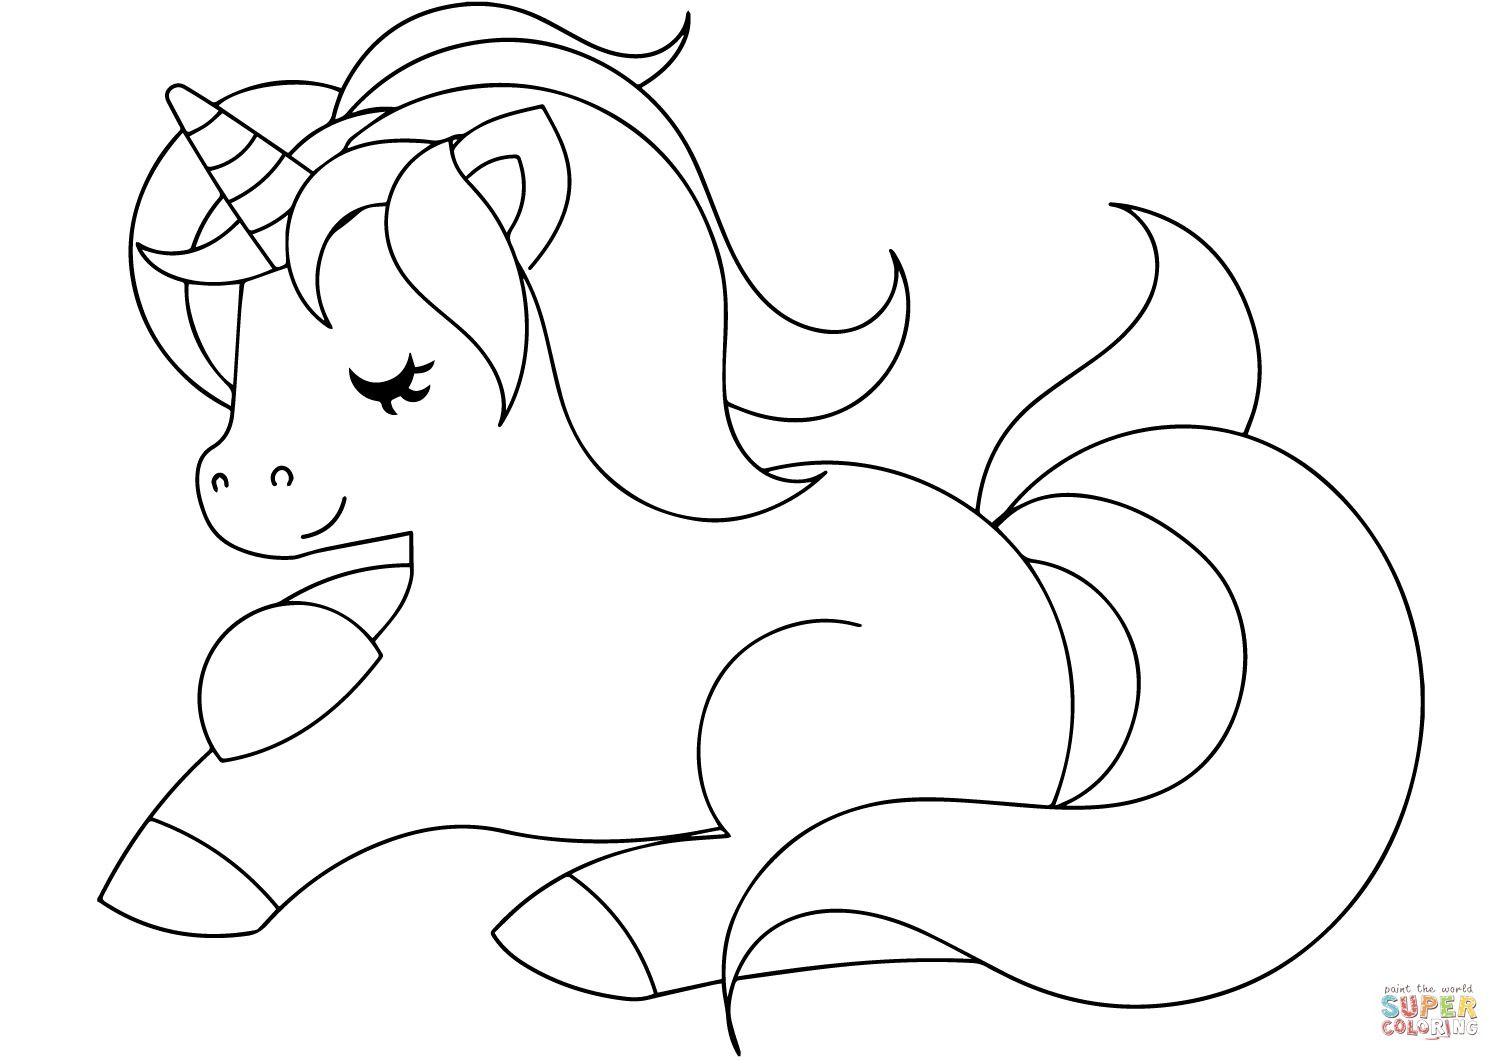 Printable Coloring Pages Unicorn
 Cute Unicorn Coloring Page